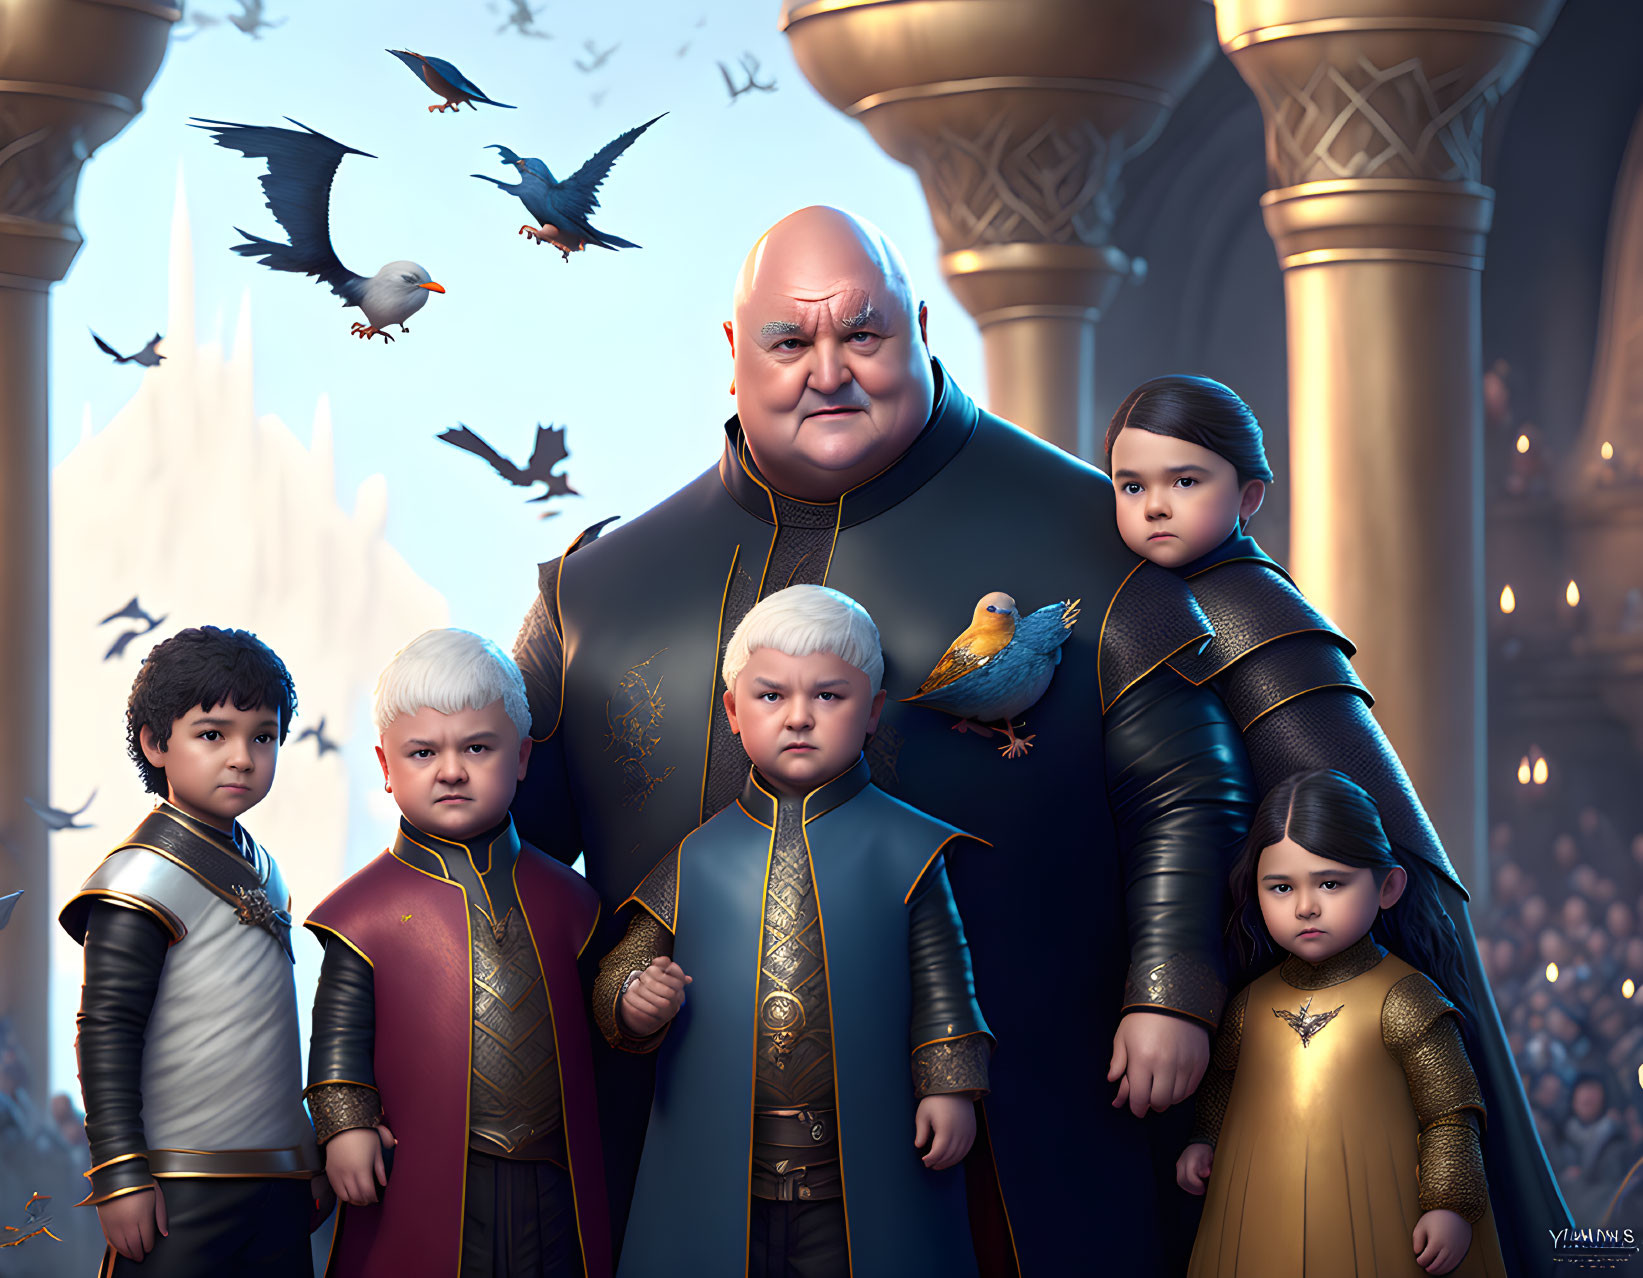 The Spider Varys